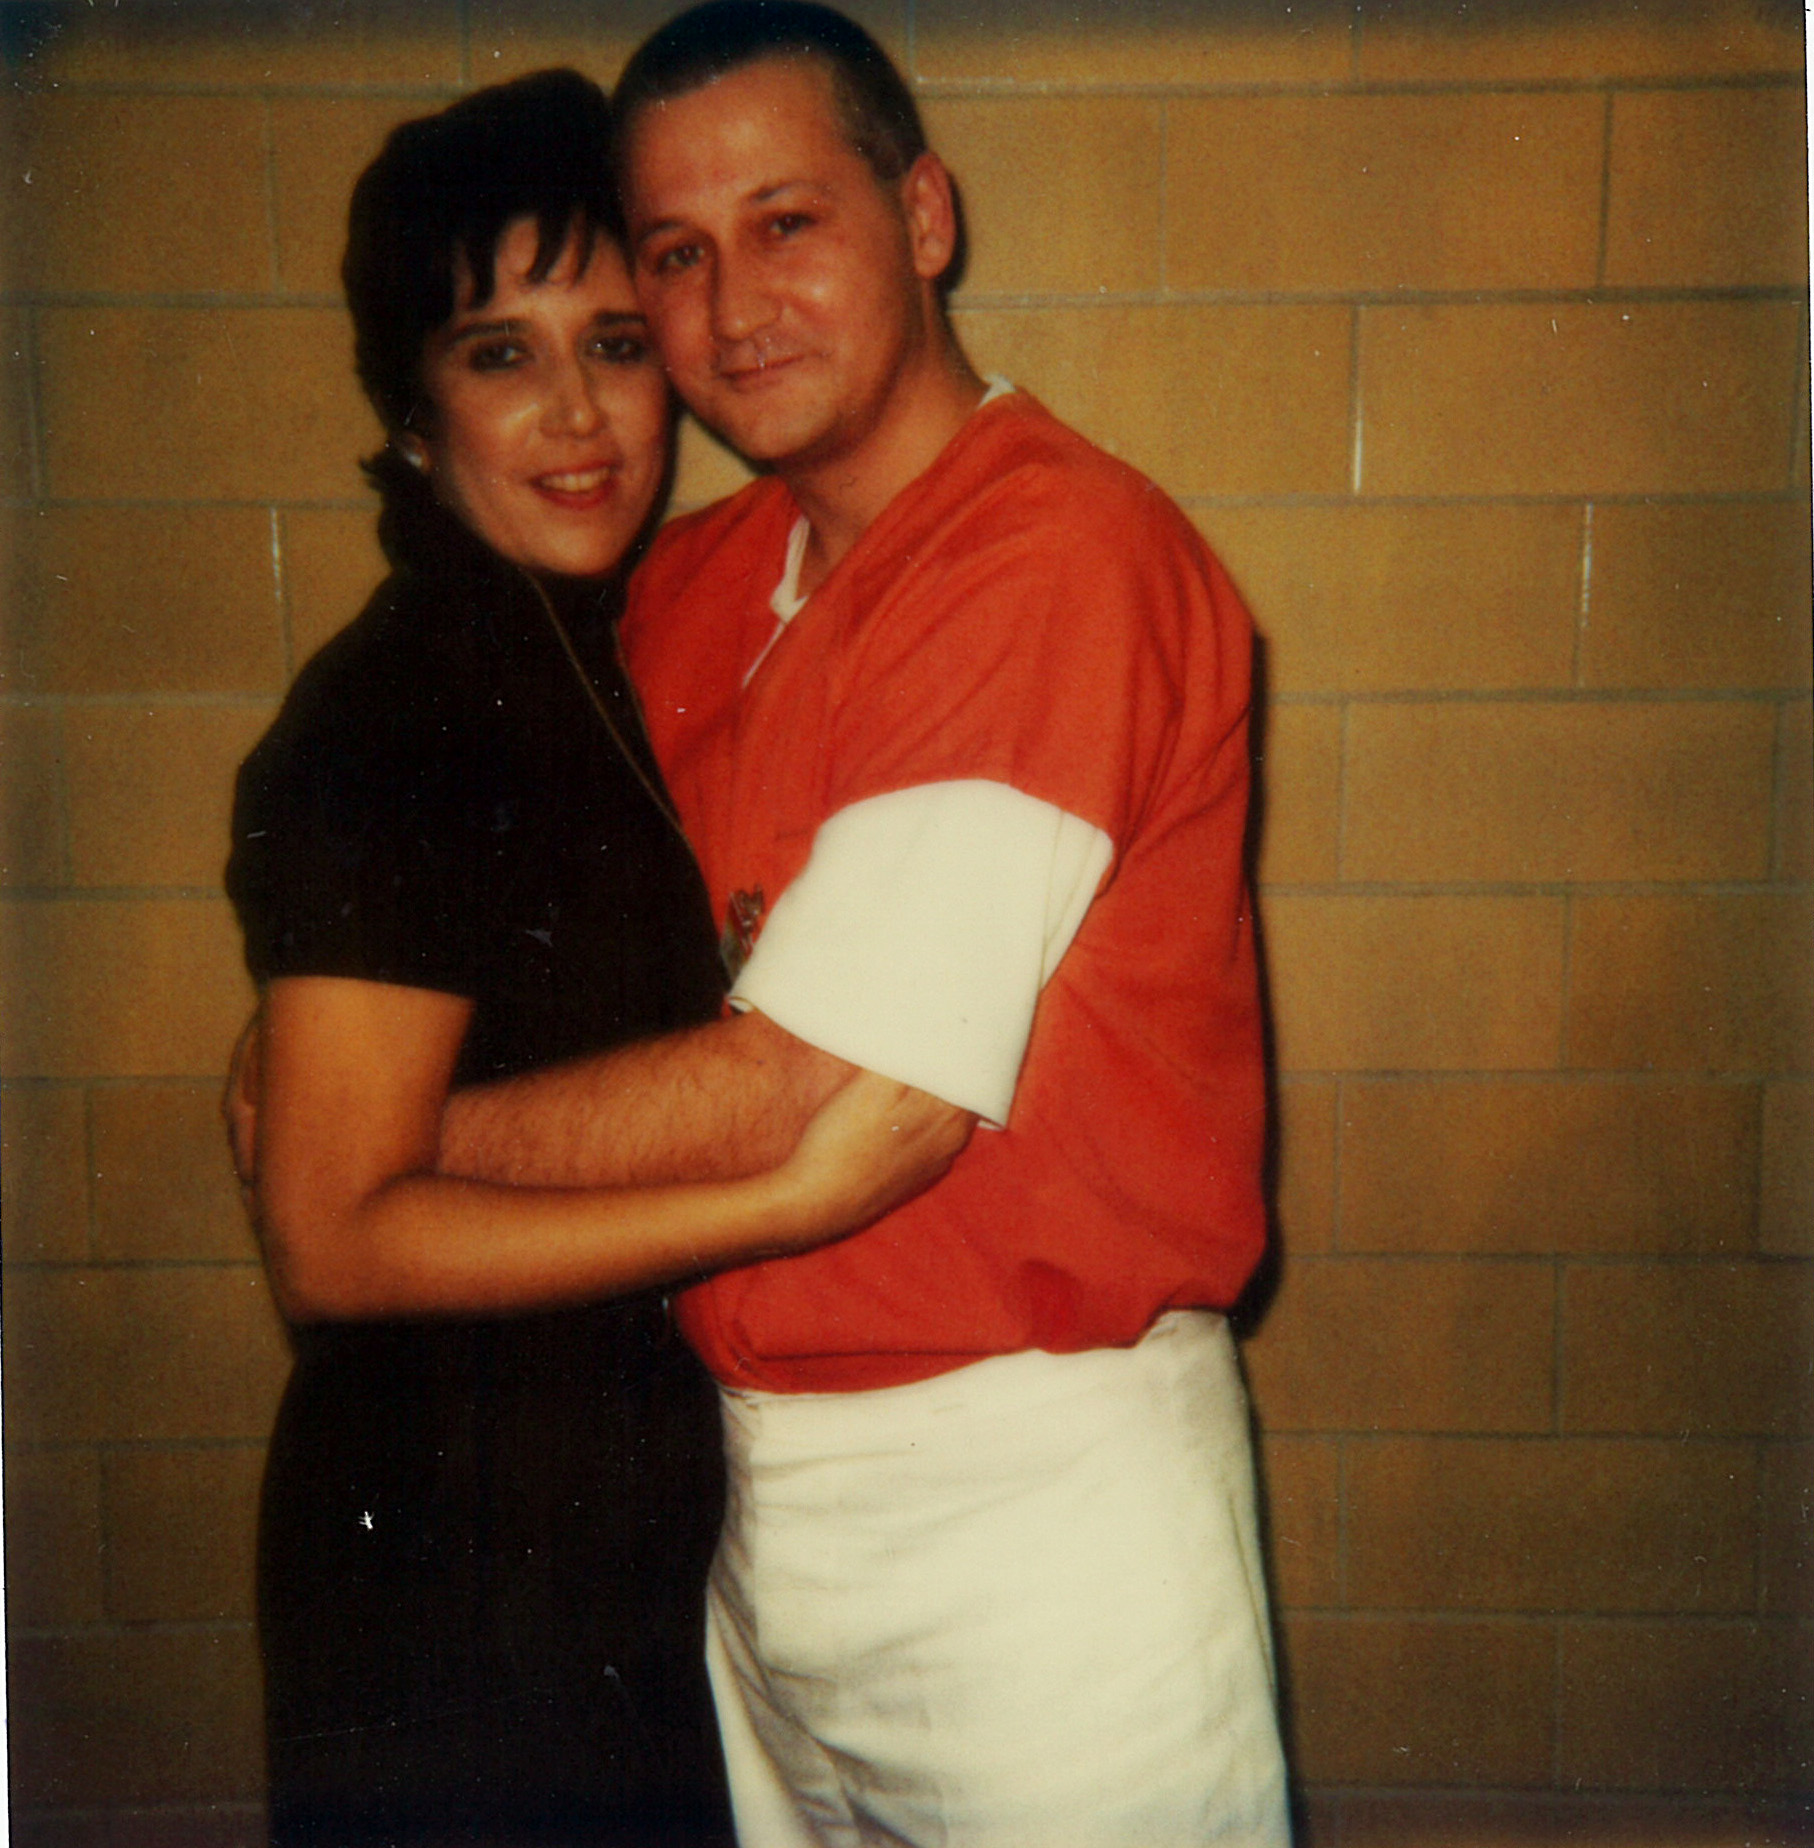 PHOTO: Rosalie and Oscar Bolin, pictured together here at Florida State Prison in an undated photo, married in 1996.